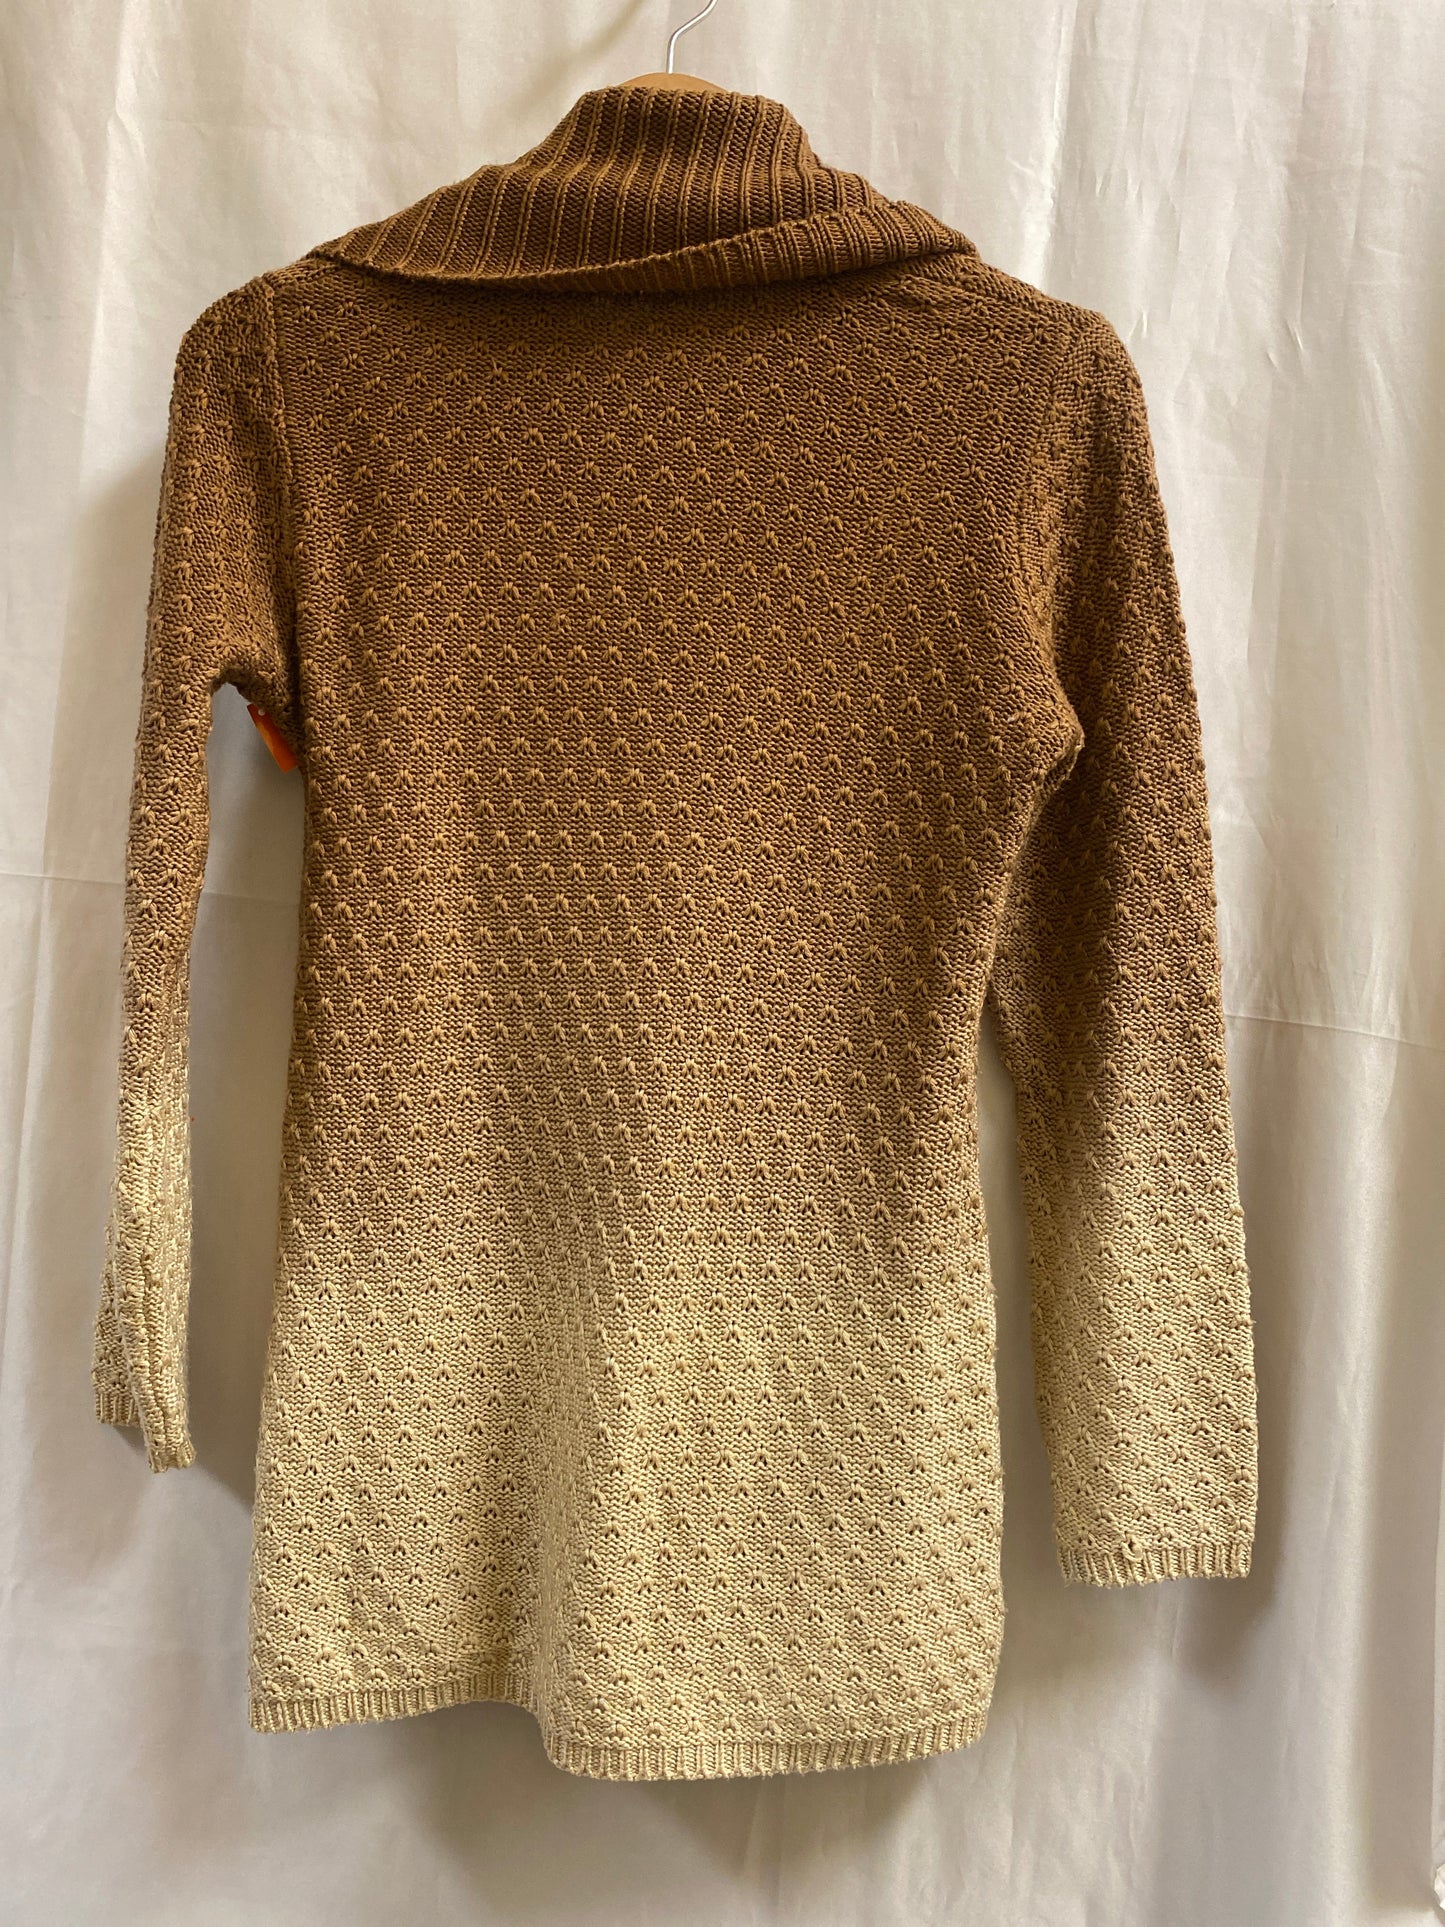 Sweater By Reba  Size: S